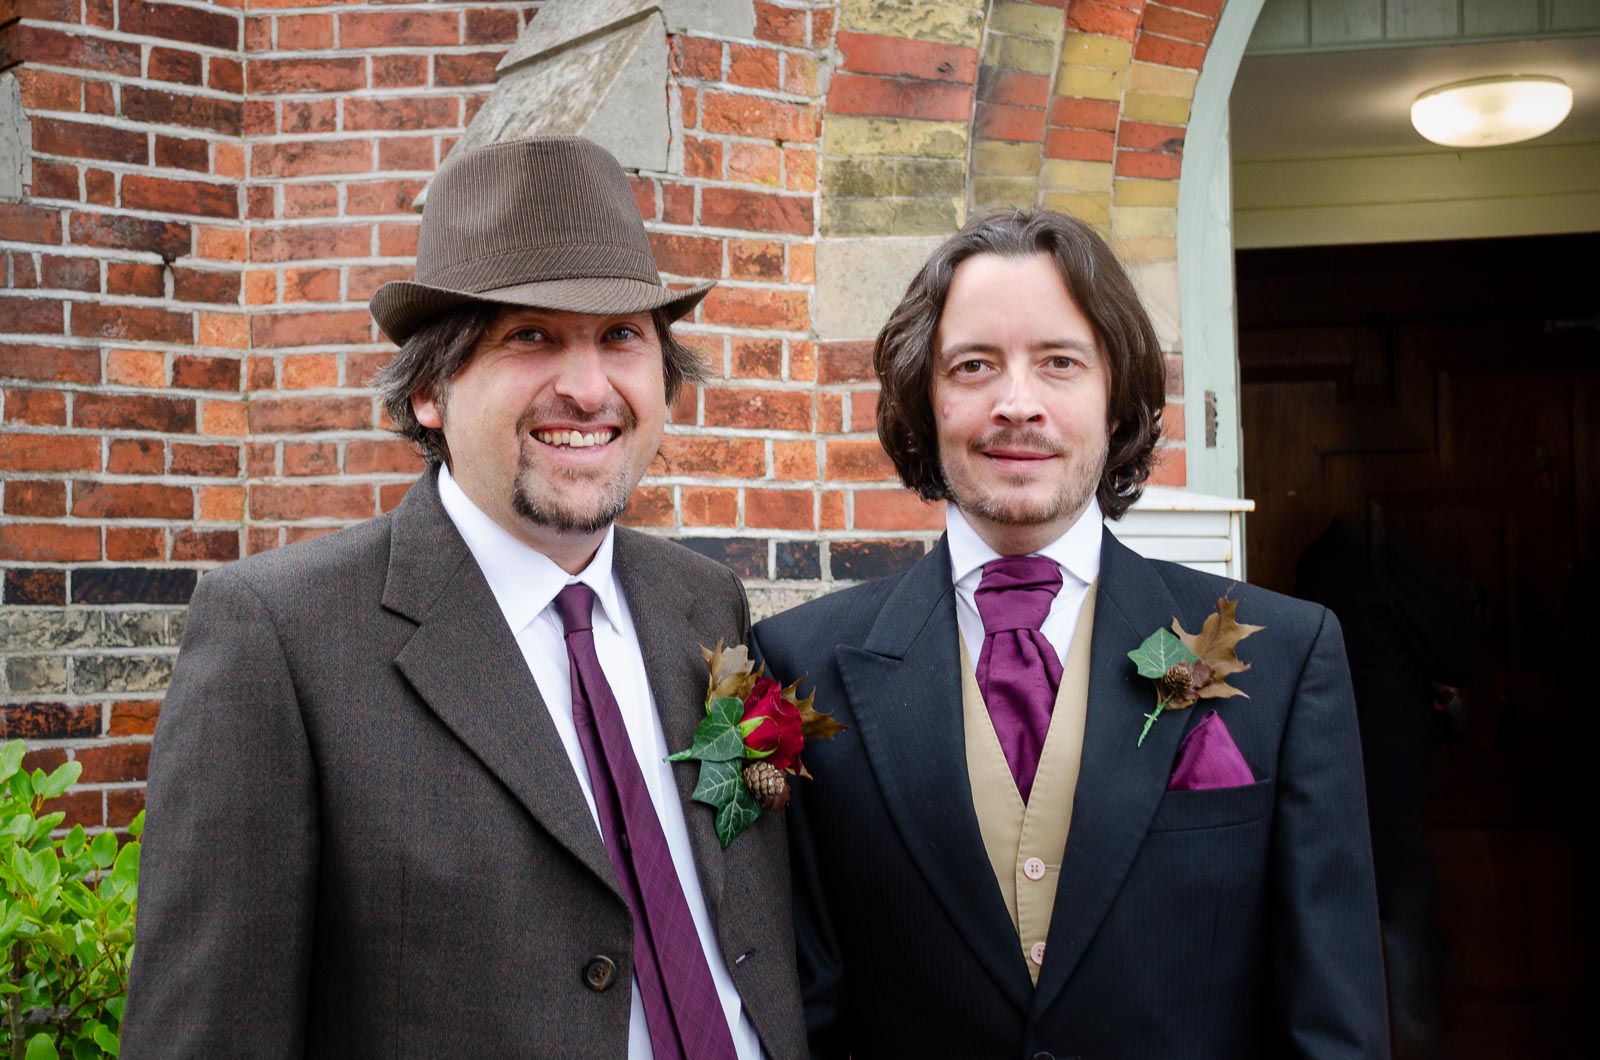 Jon and his best man pose outside St Michaels Church in Brighton before his wedding.